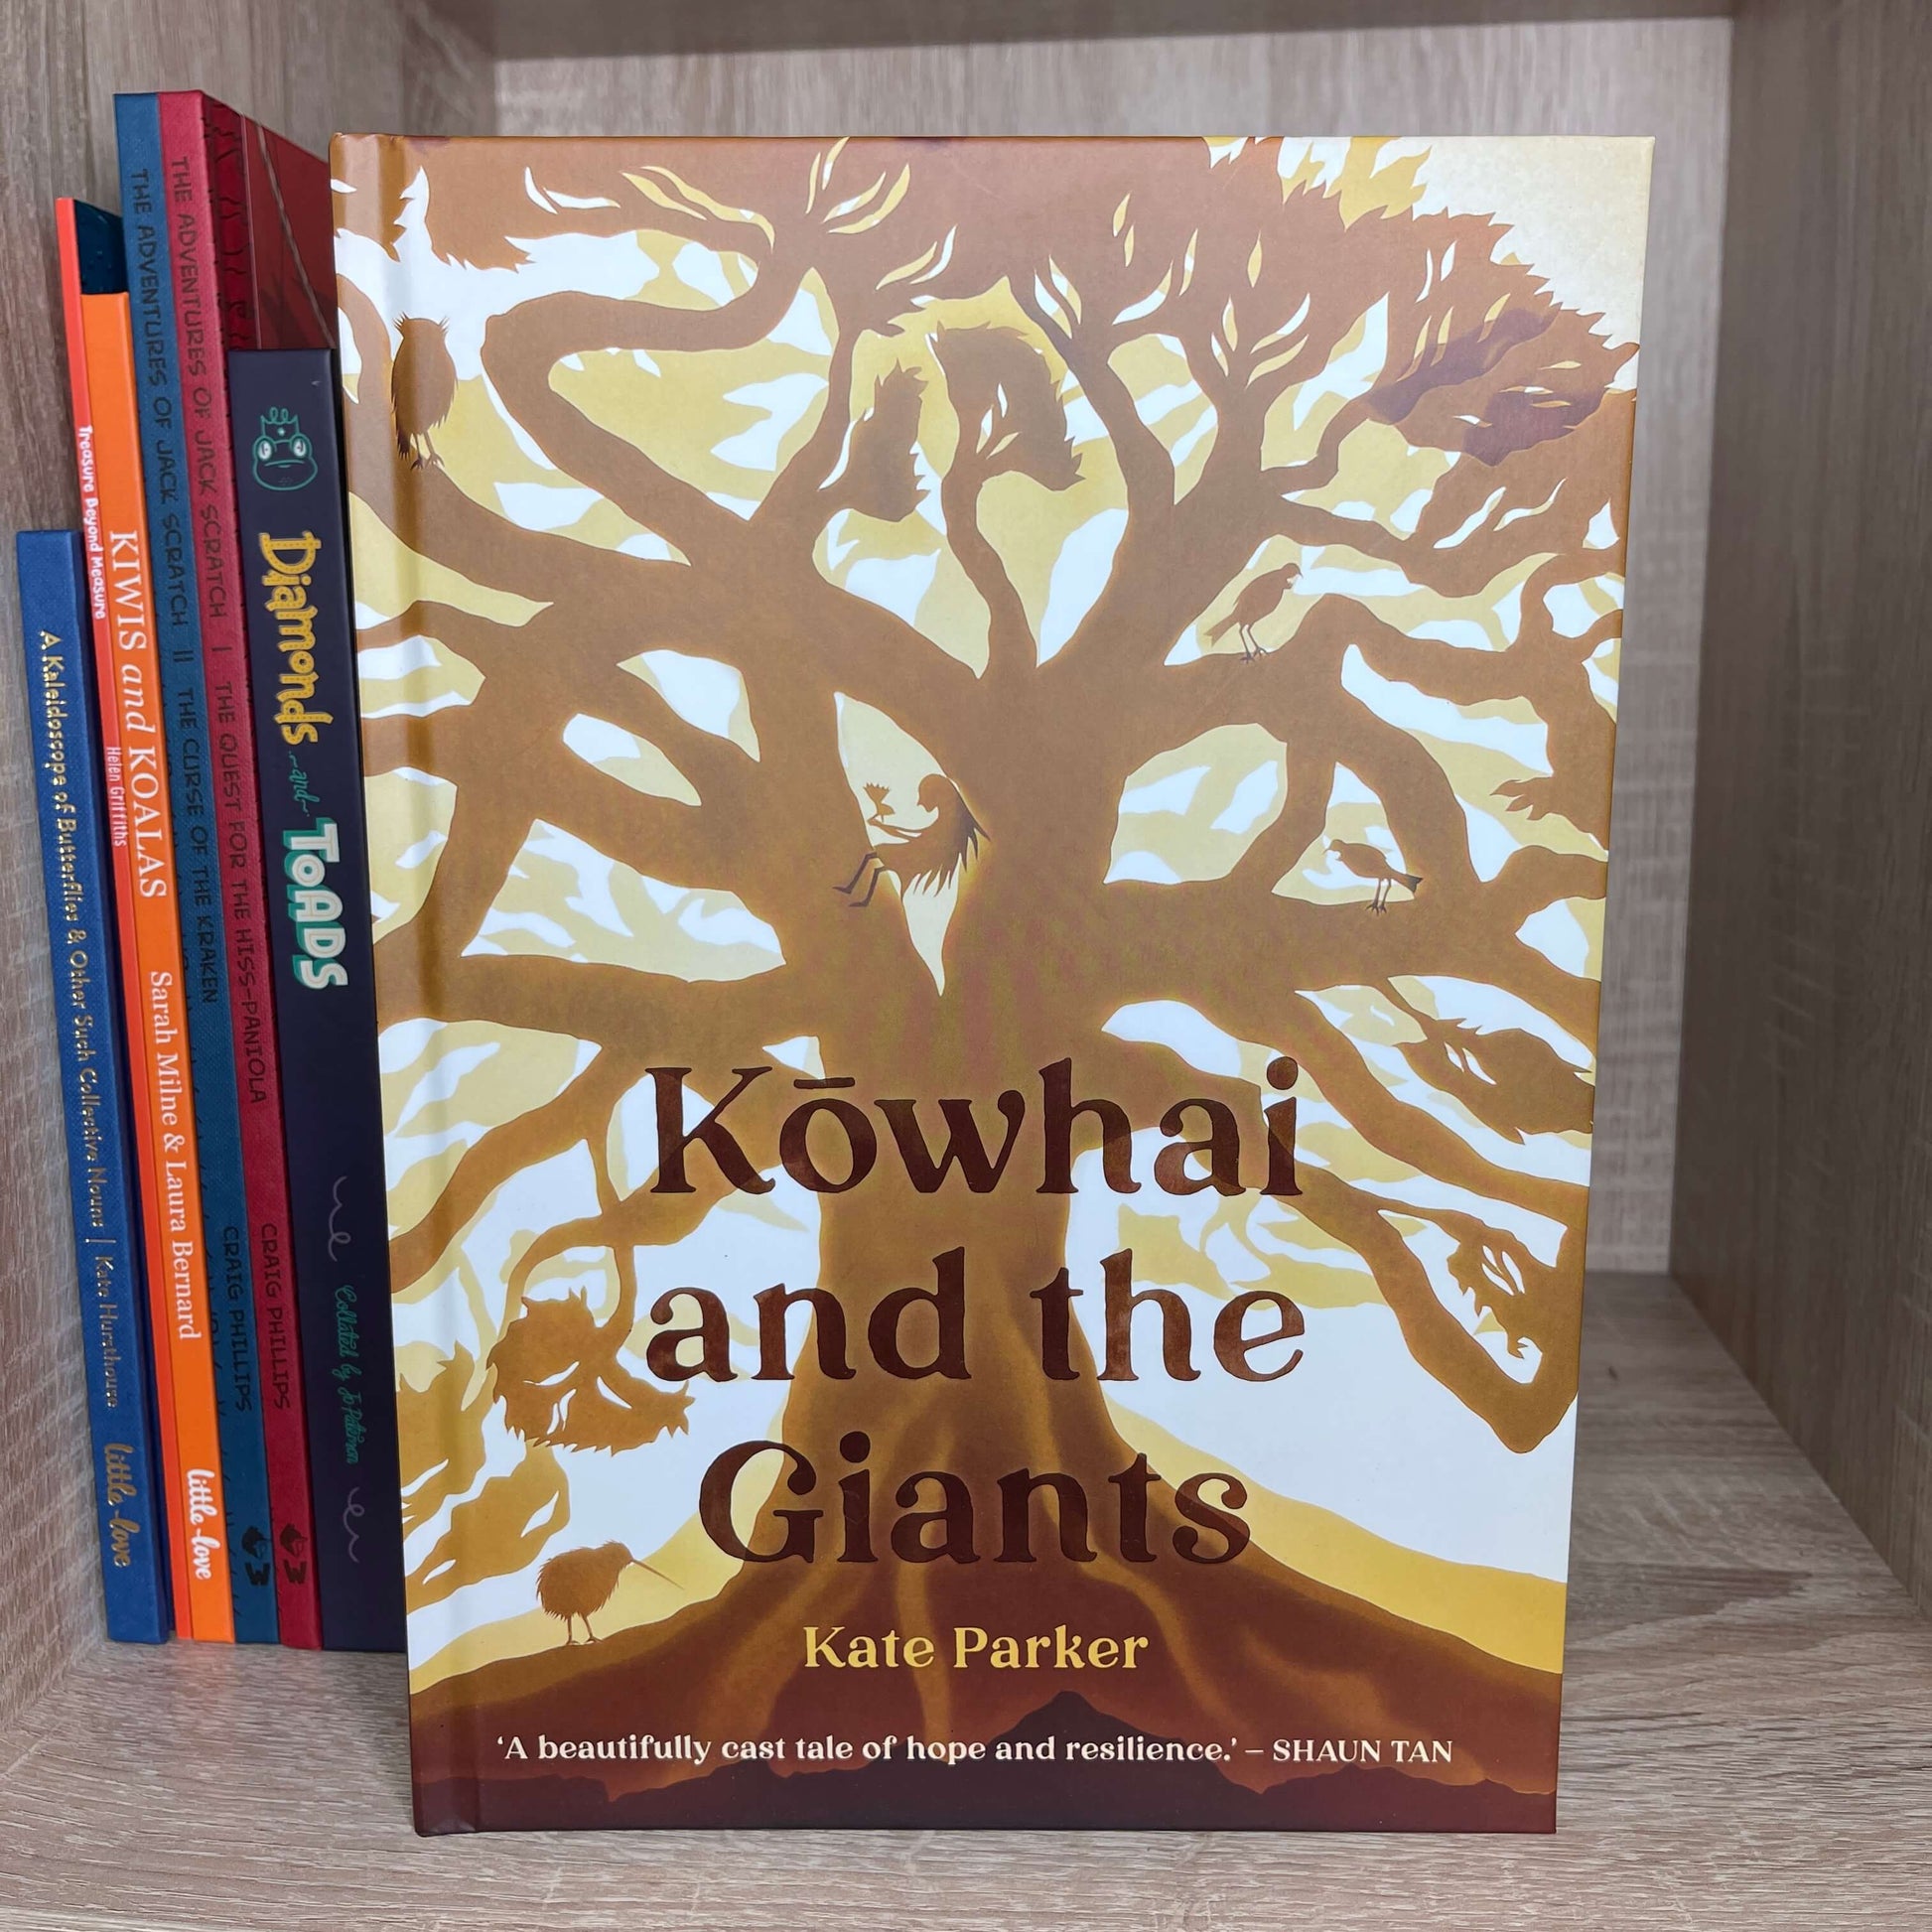 Childrens book Kowhai and the Giants by Kate Parker.